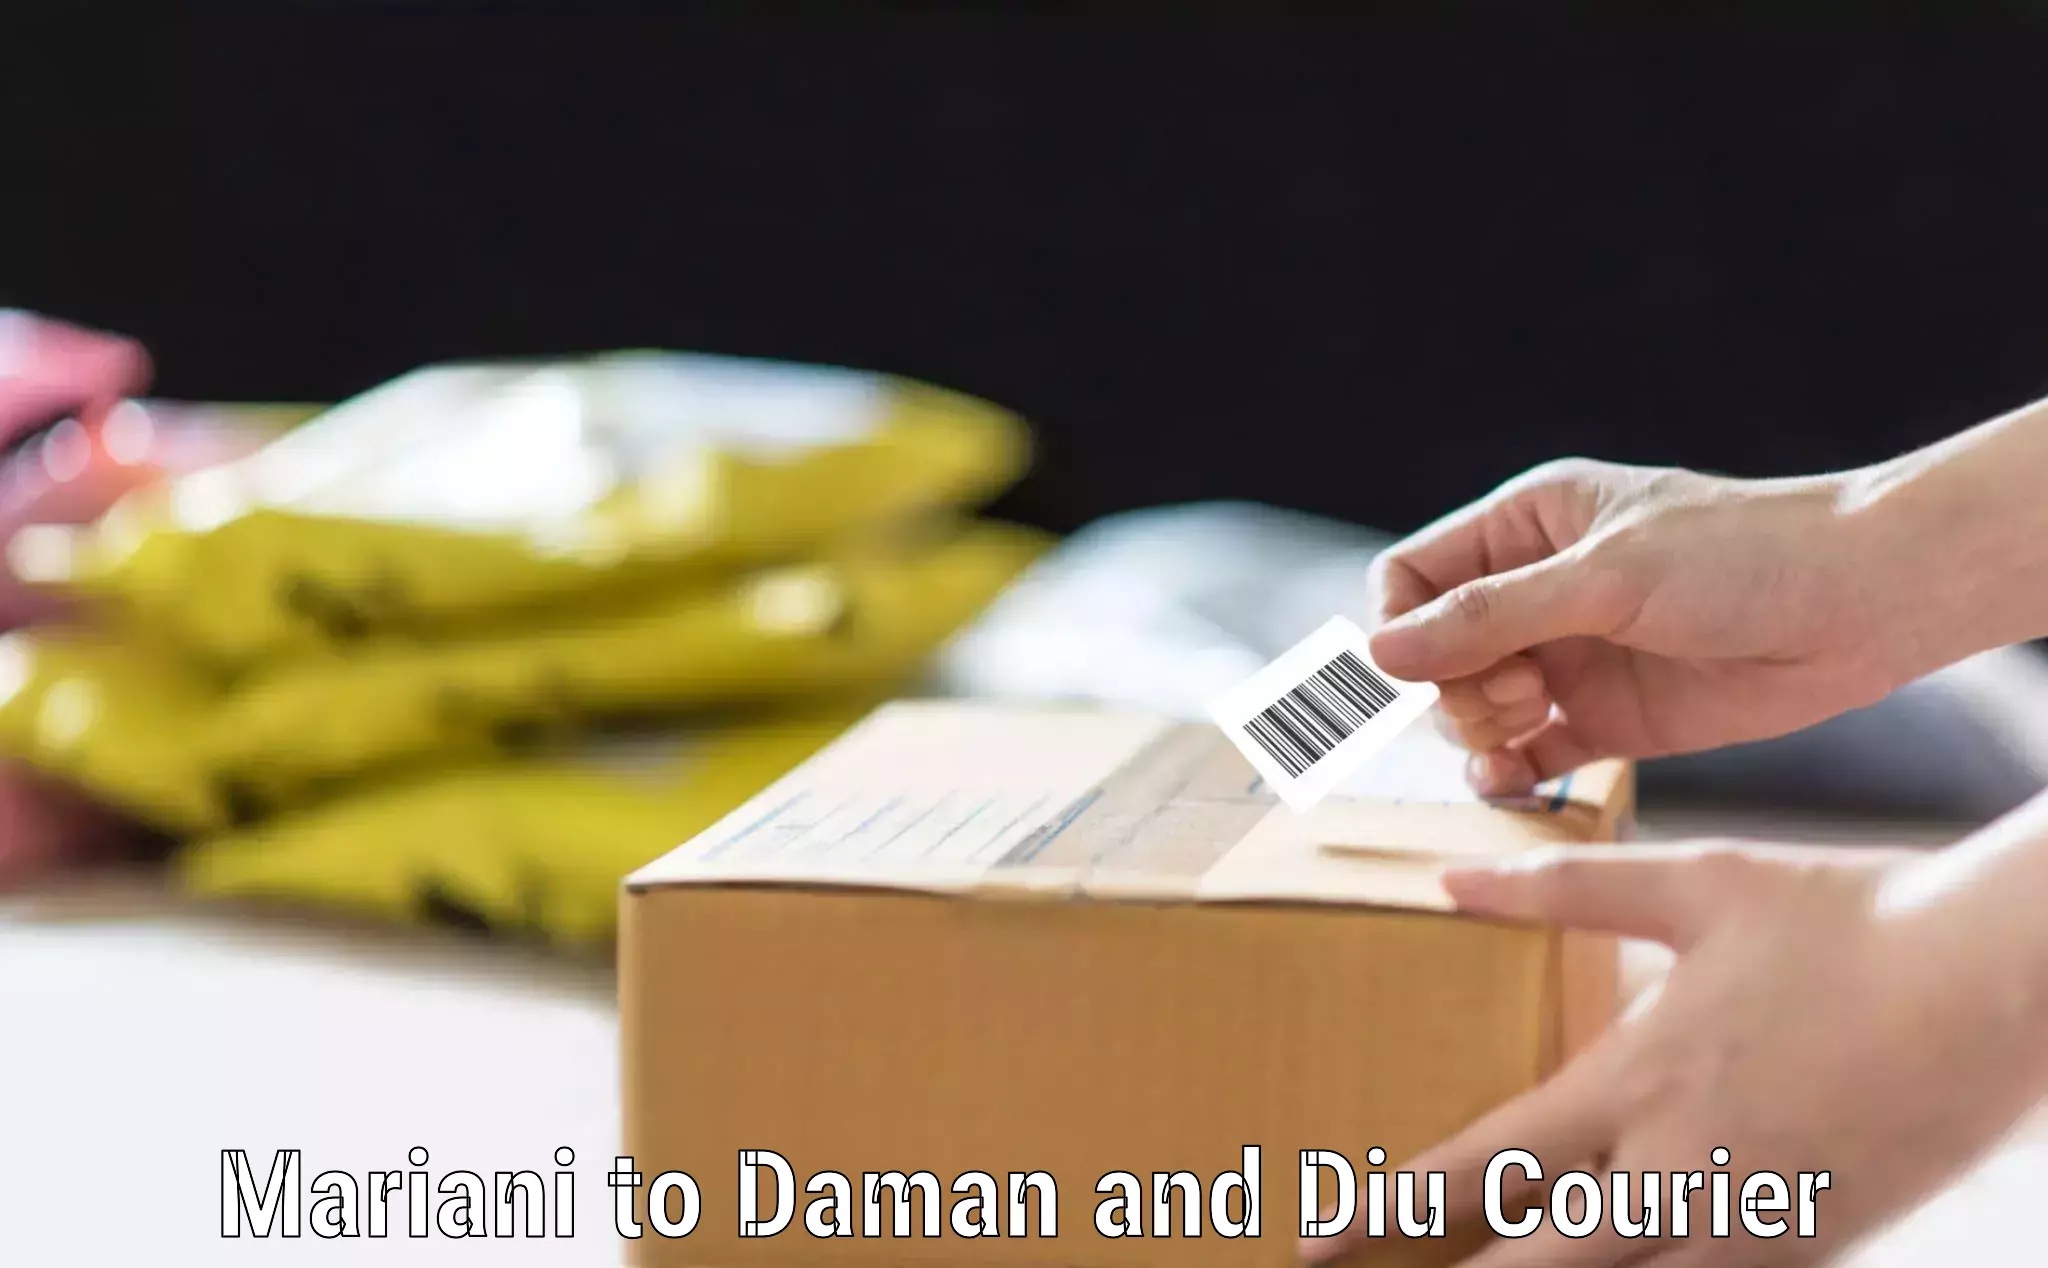 Luggage transport consultancy Mariani to Daman and Diu